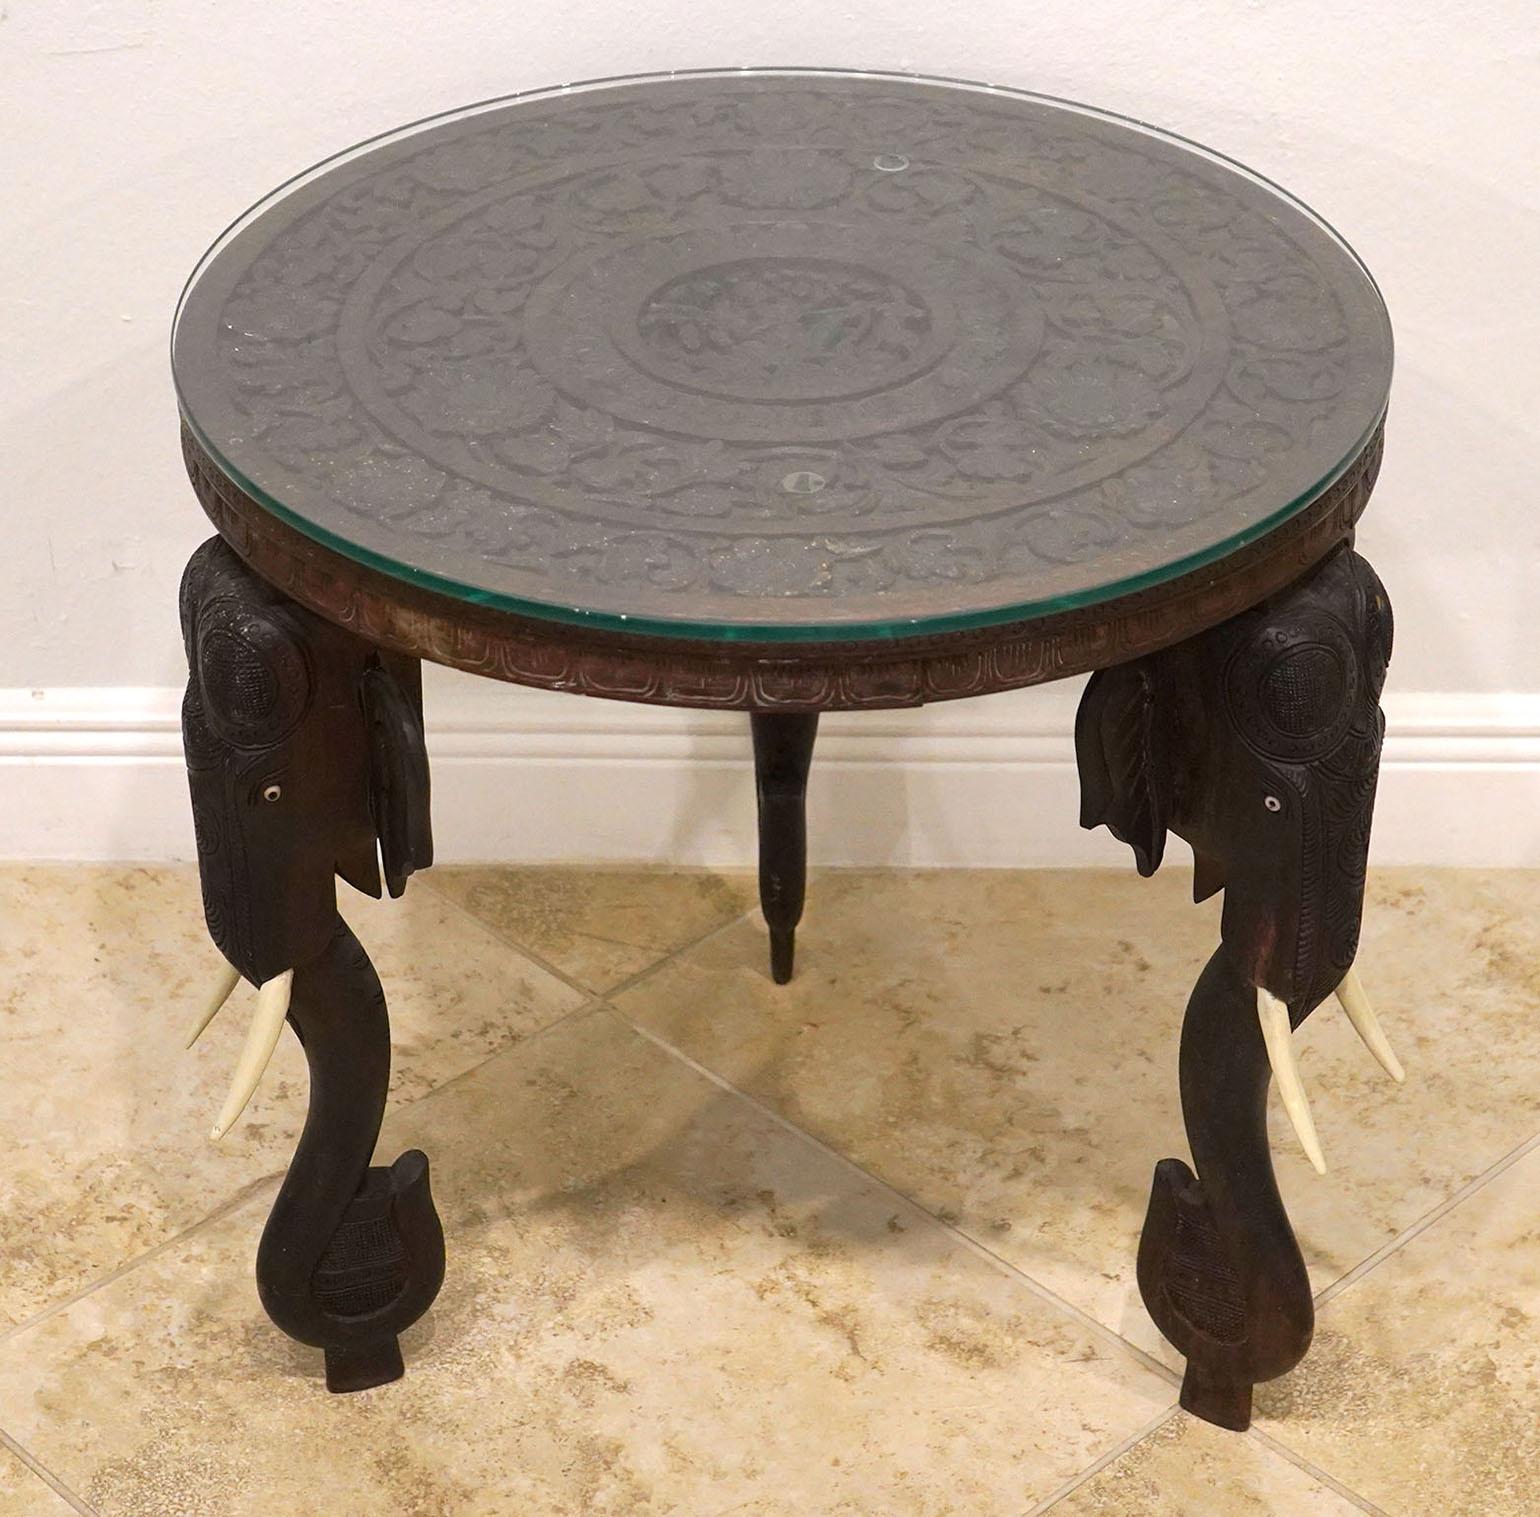 19th Century Anglo Indian Carved Round Table Elephant Supports Late 19th C. With Carved Top